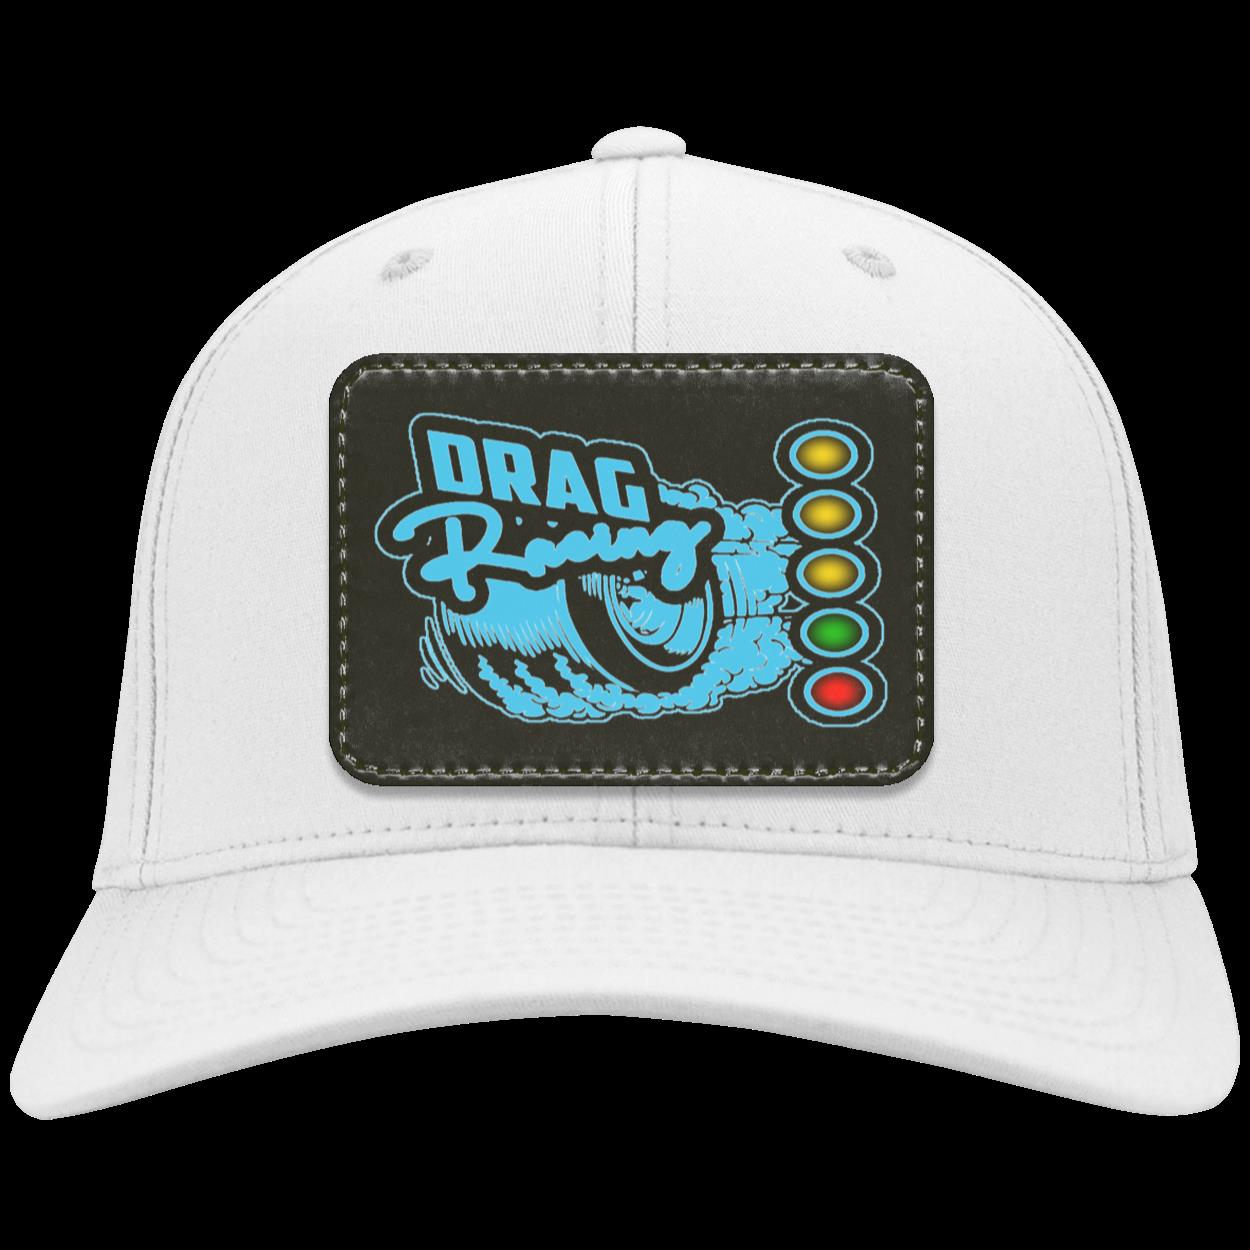 Drag Racing Patched Twill Cap V8